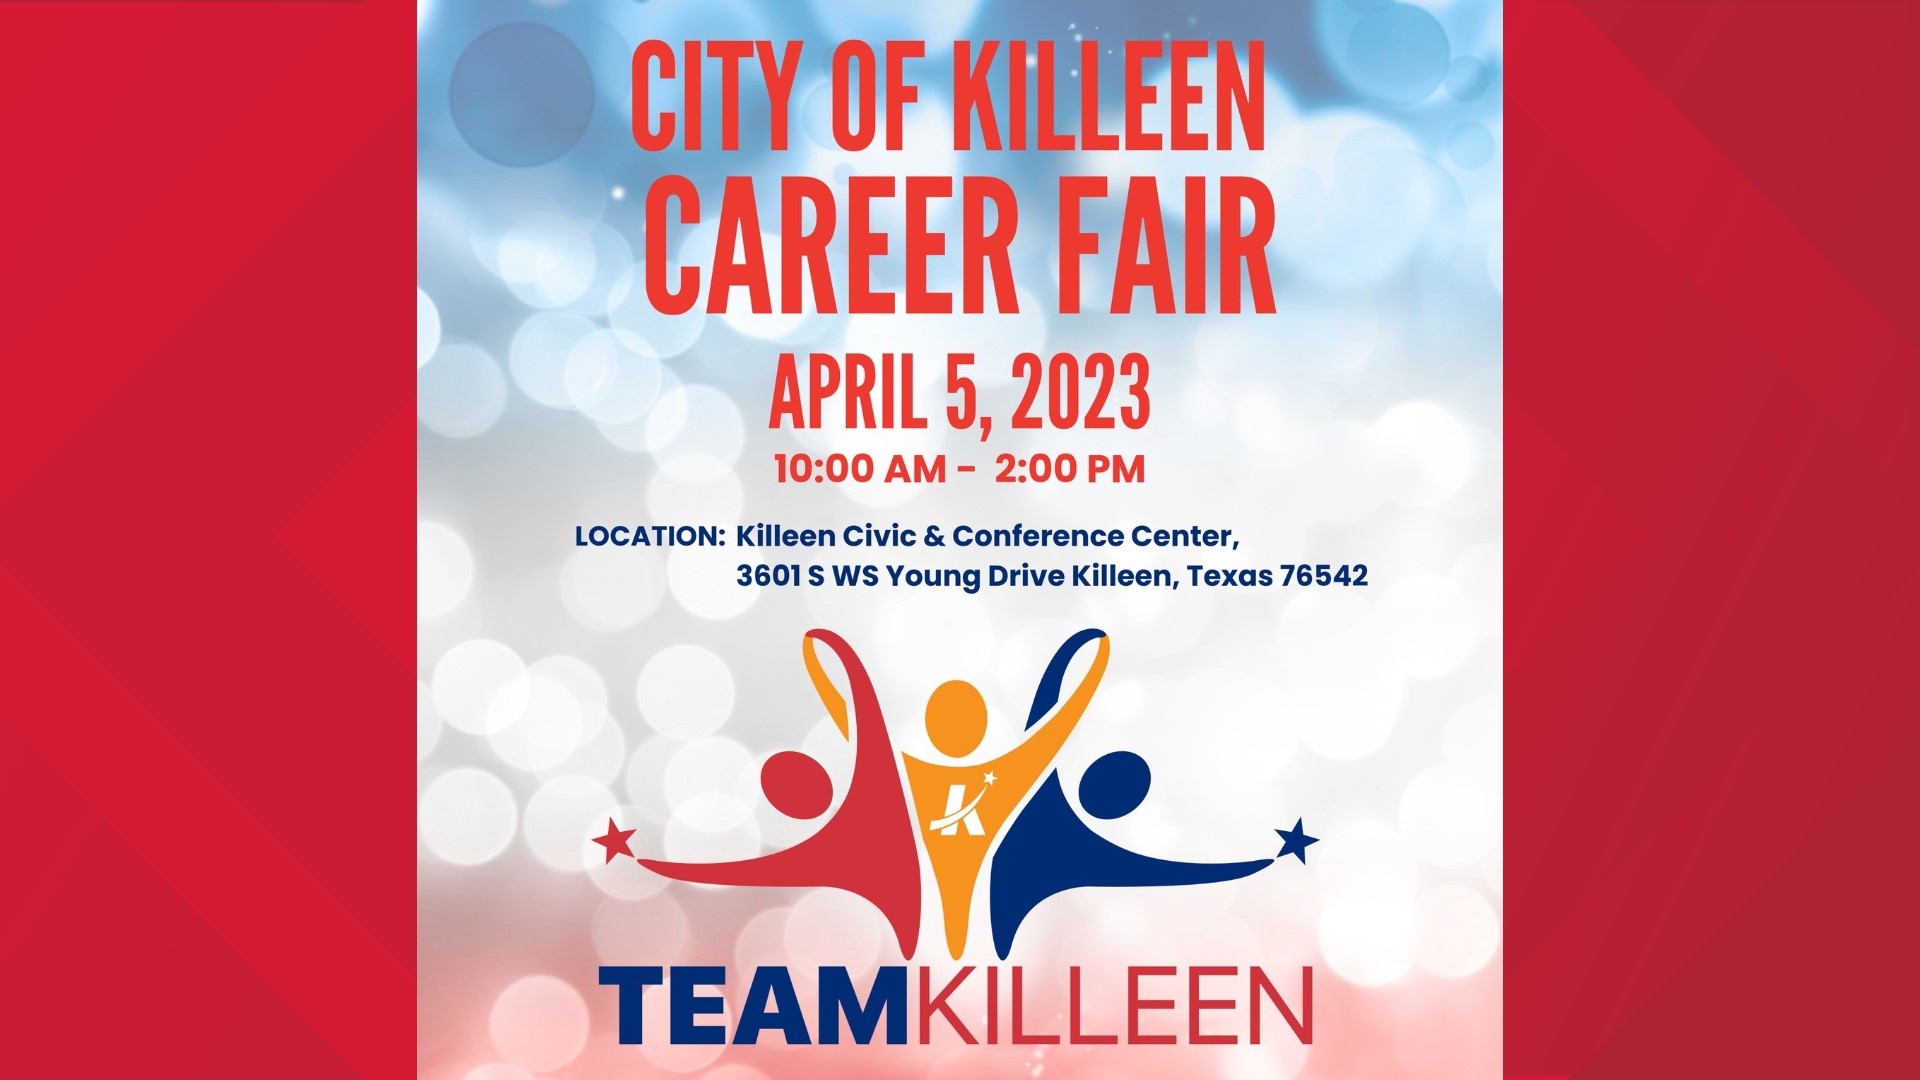 Career fair hosted by City of Killeen